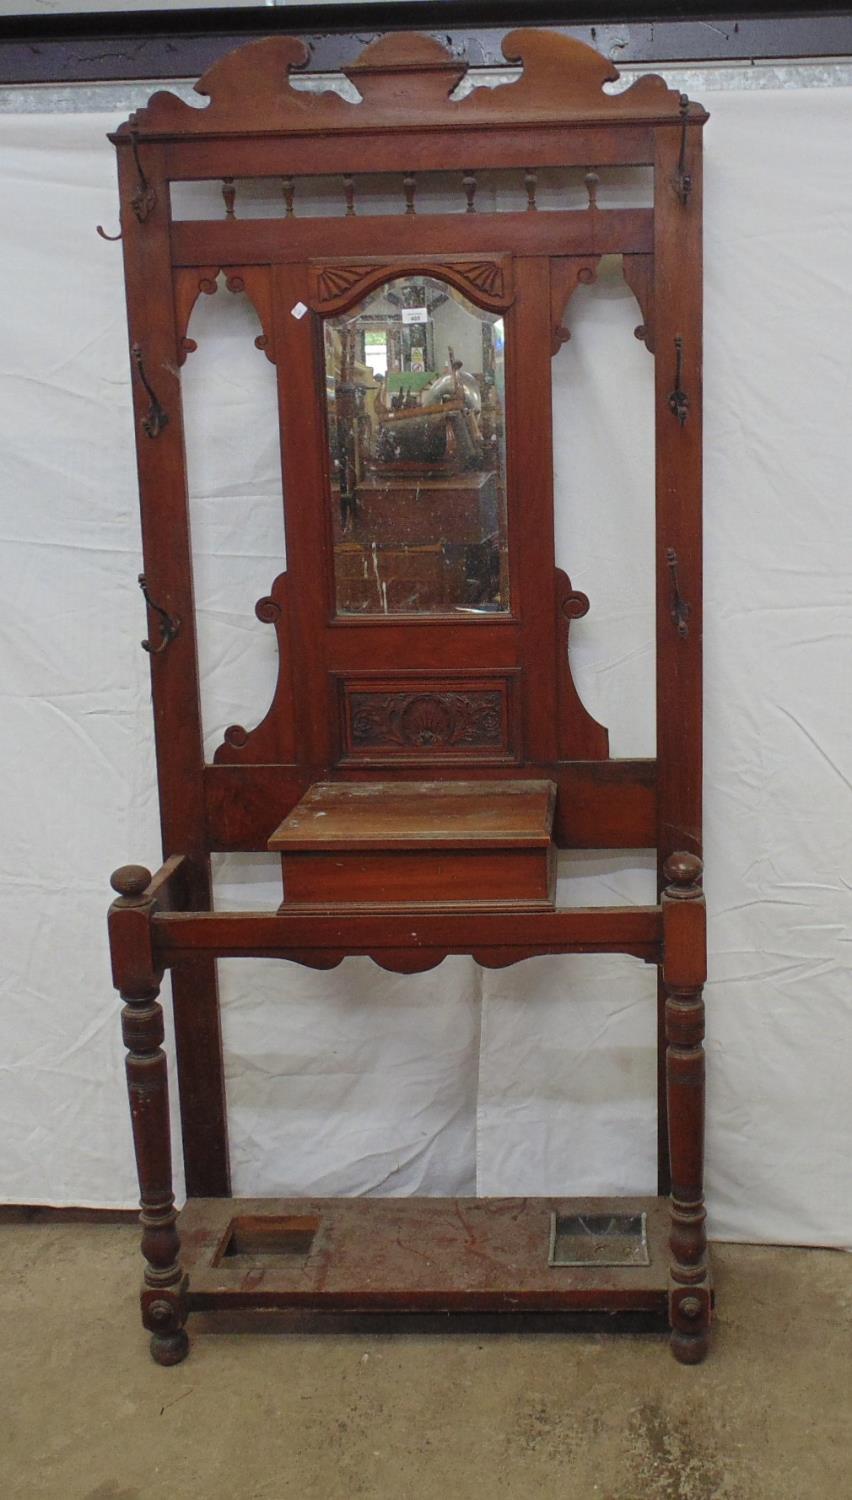 19th century mahogany hall standing having seven hooks (some side hooks missing), a central mirror